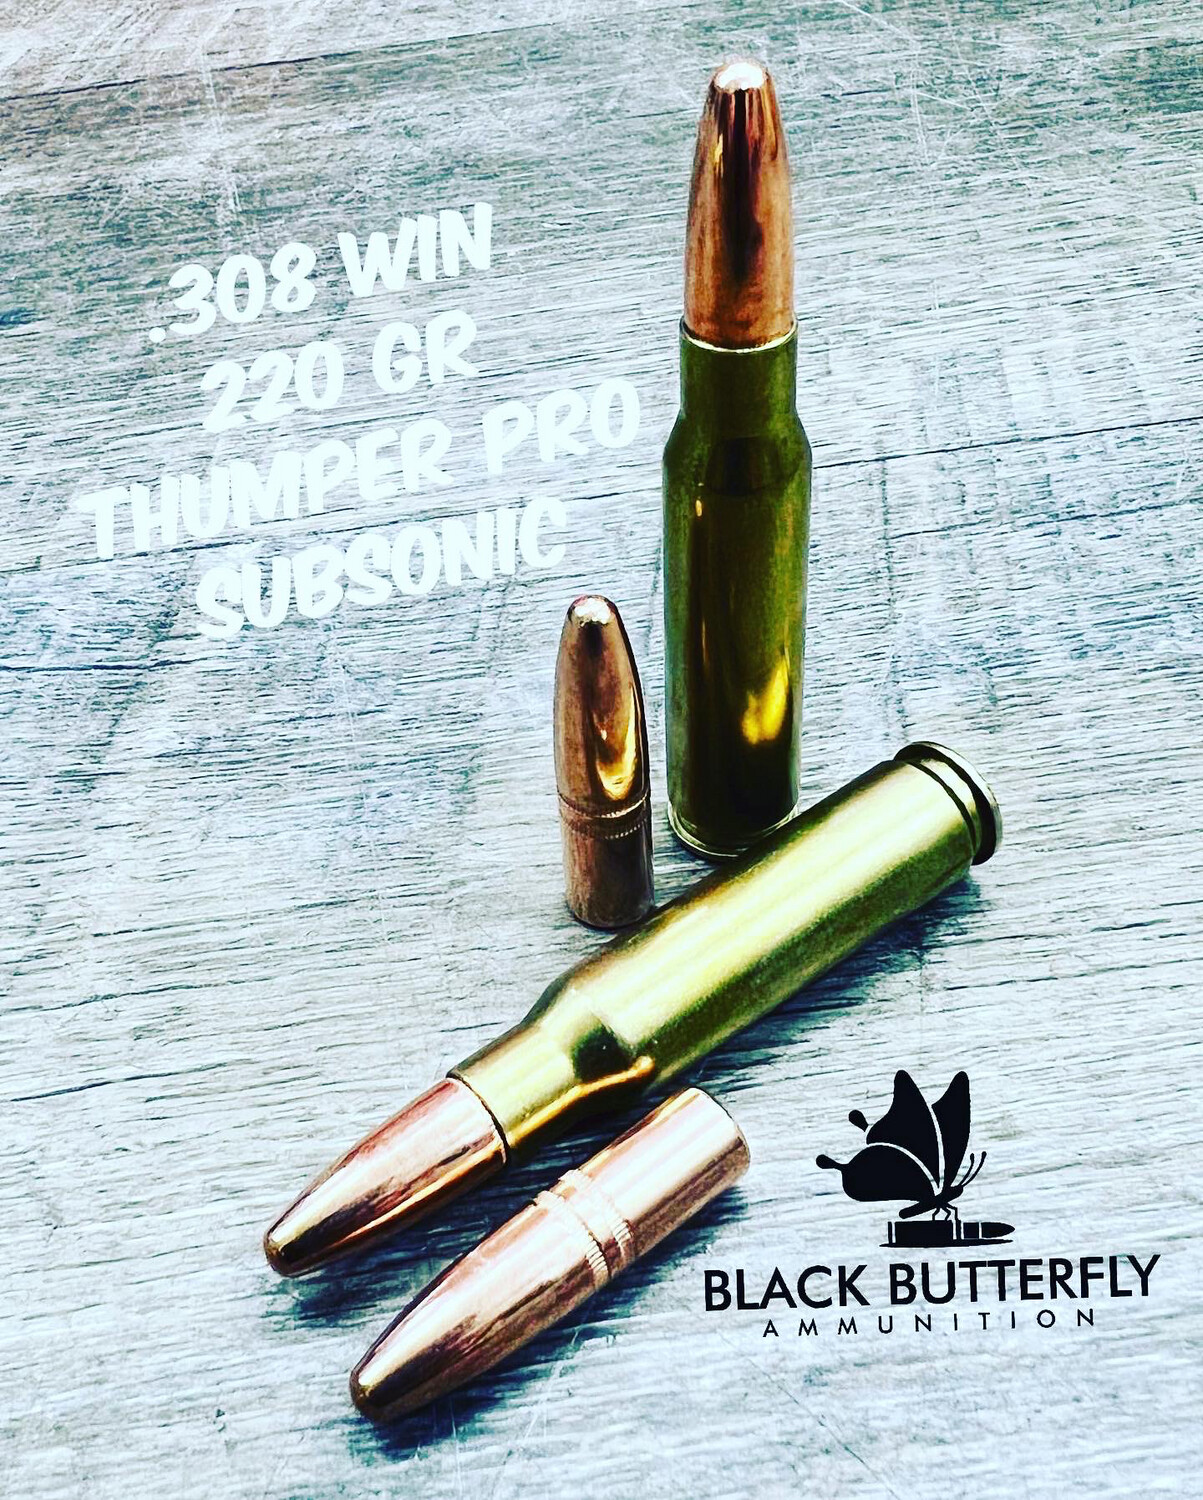 Black Butterfly Ammunition, Remanufactured, .308 WIN/7.62x51mm, 220 gr., 60 Rounds, "THUMPER PRO" SUBSONIC for 1:10 Twist 16-16.5" Rifles, MINI-BUCKET